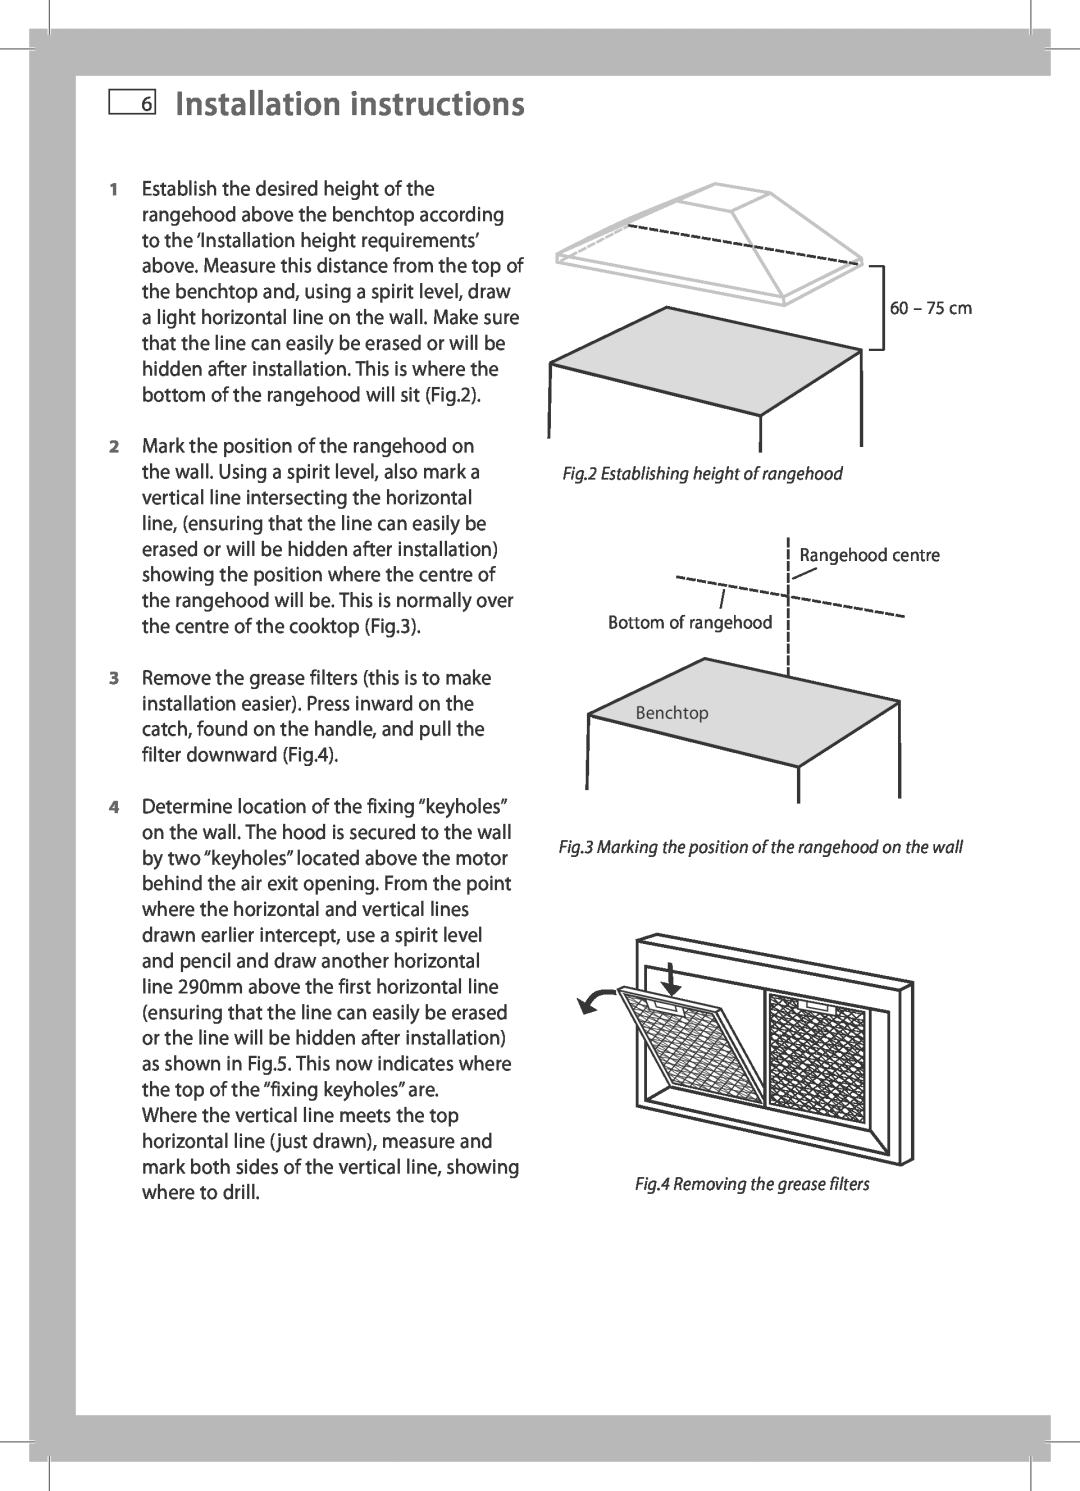 Fisher & Paykel HC90PCIX2 Installation instructions, Establishing height of rangehood, Removing the grease filters 